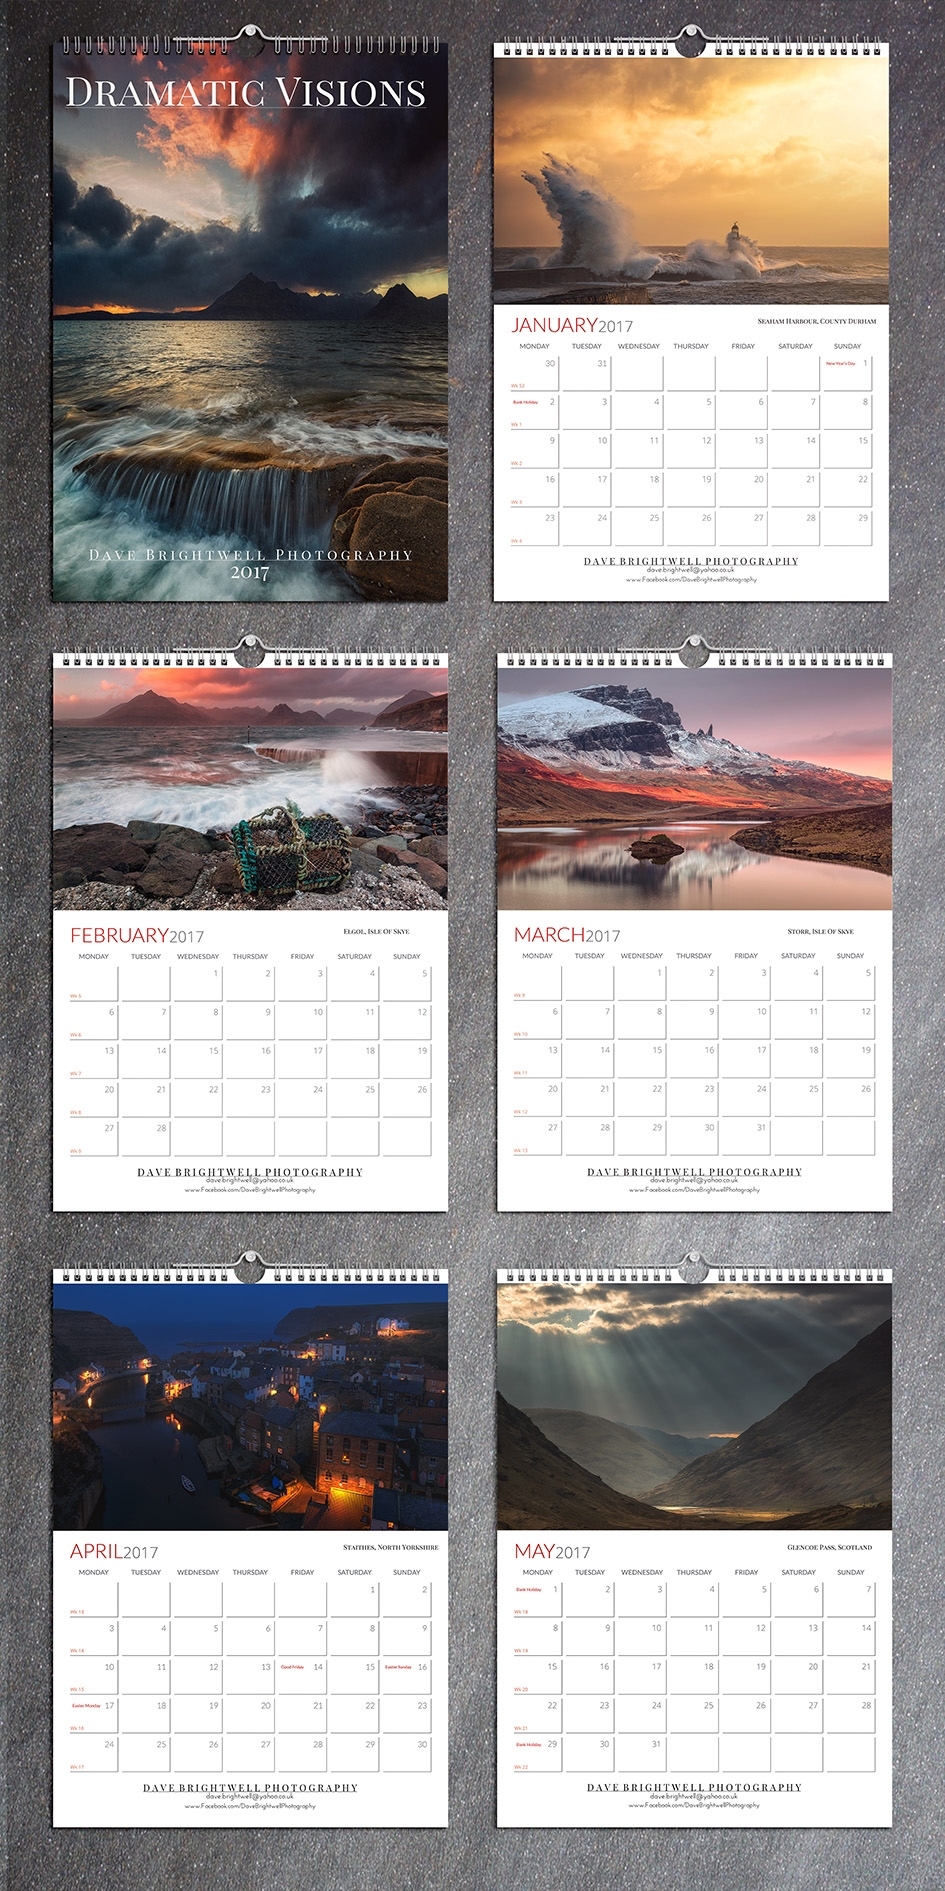 Dave Brightwell Photography | Colour Calendars Uk Calendar Printing For Photographers